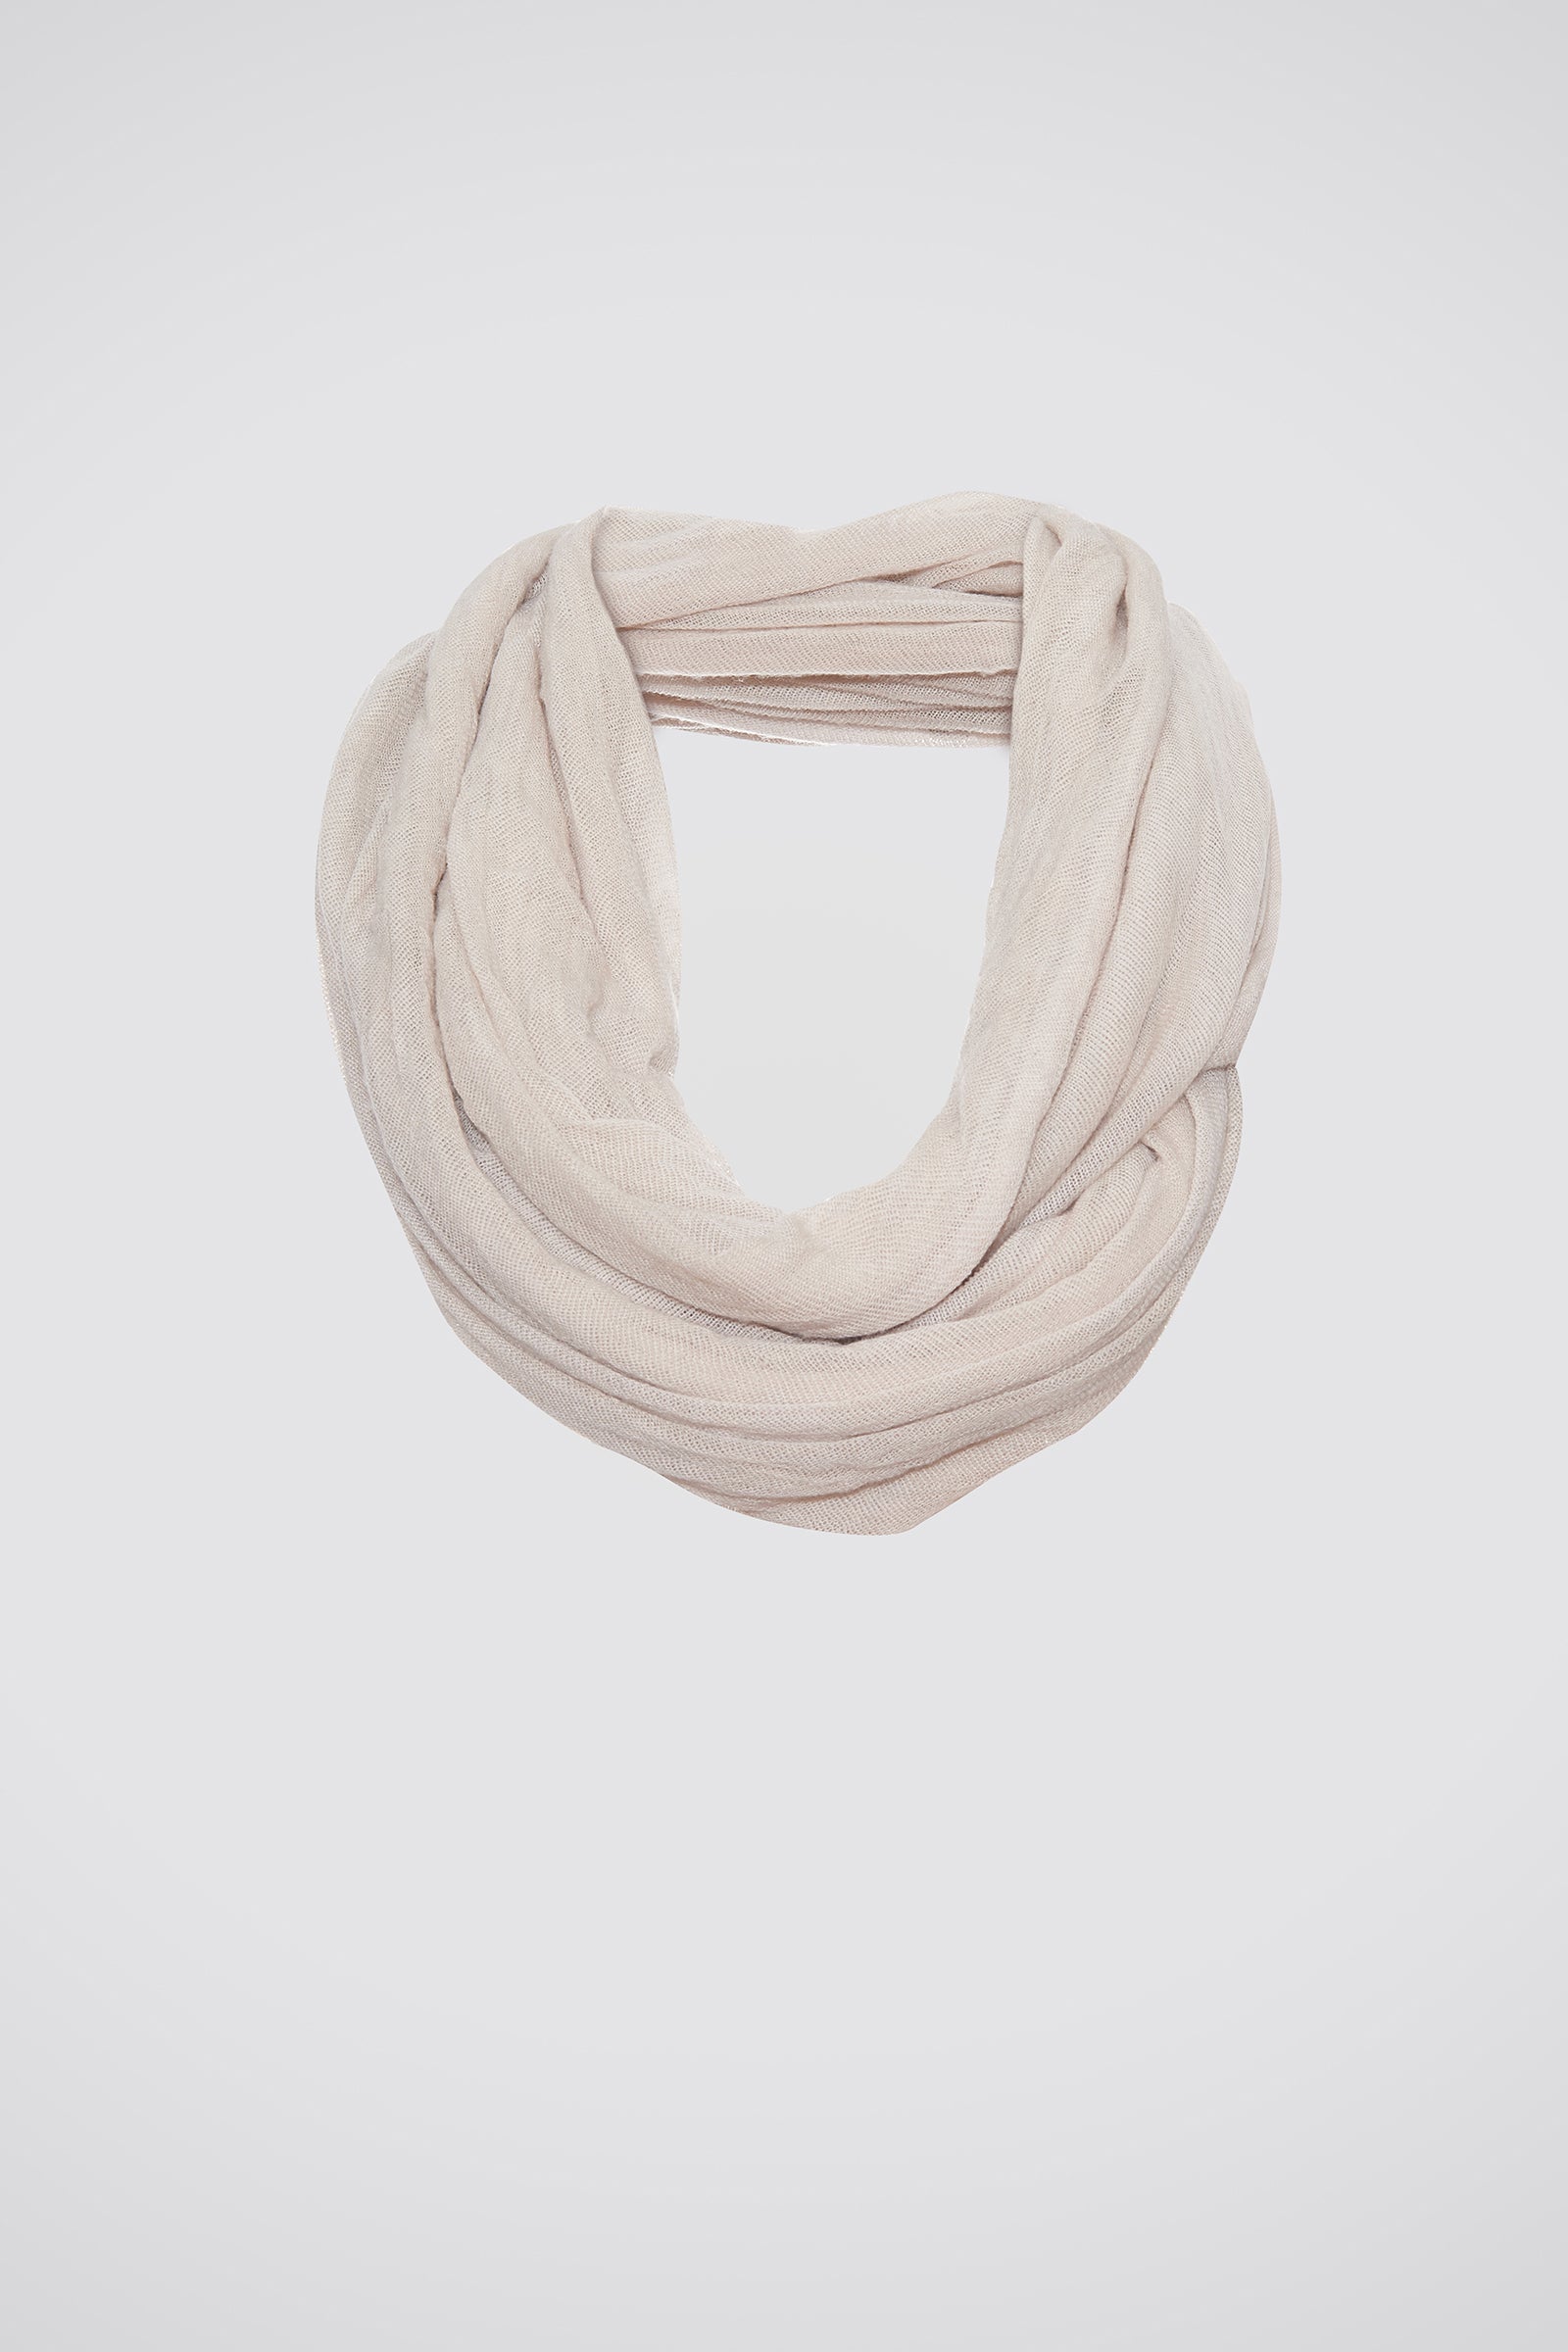 Kal Rieman Infinity Circle Scarf in Cream on Model Front View Tied